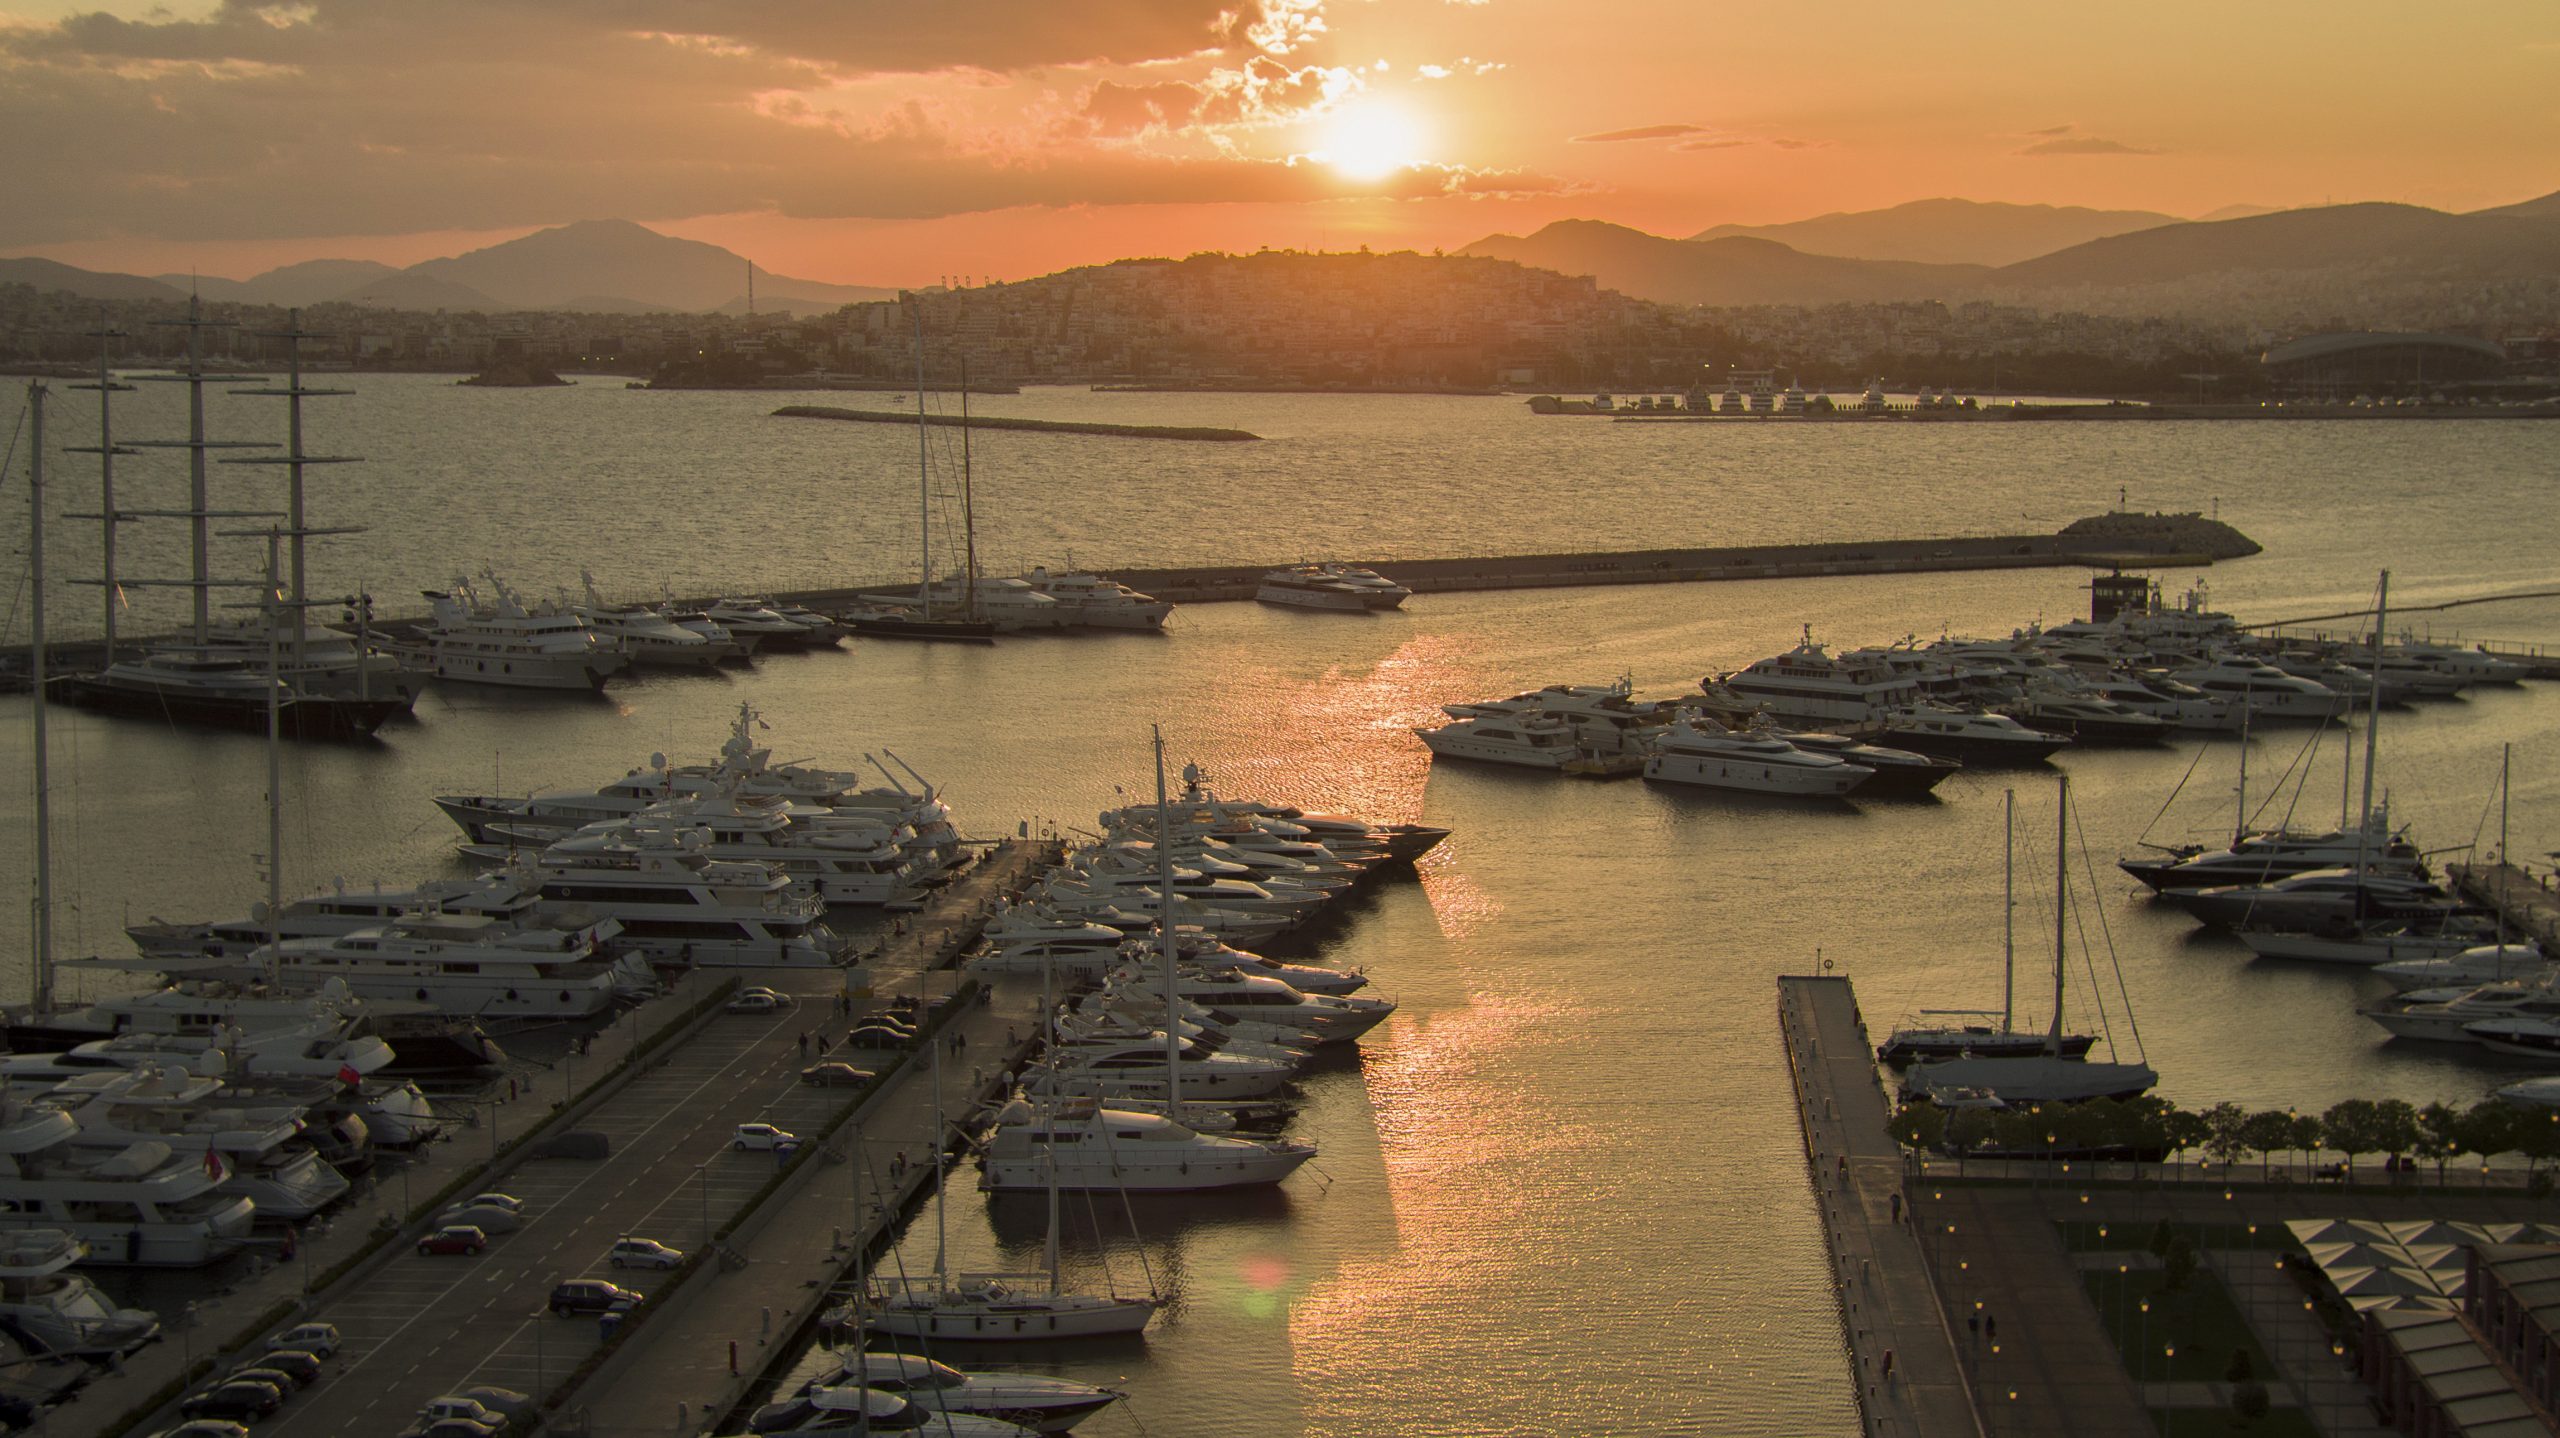 Aerial photograph of docked yachts at sunset in Flisvos Marina in Greece